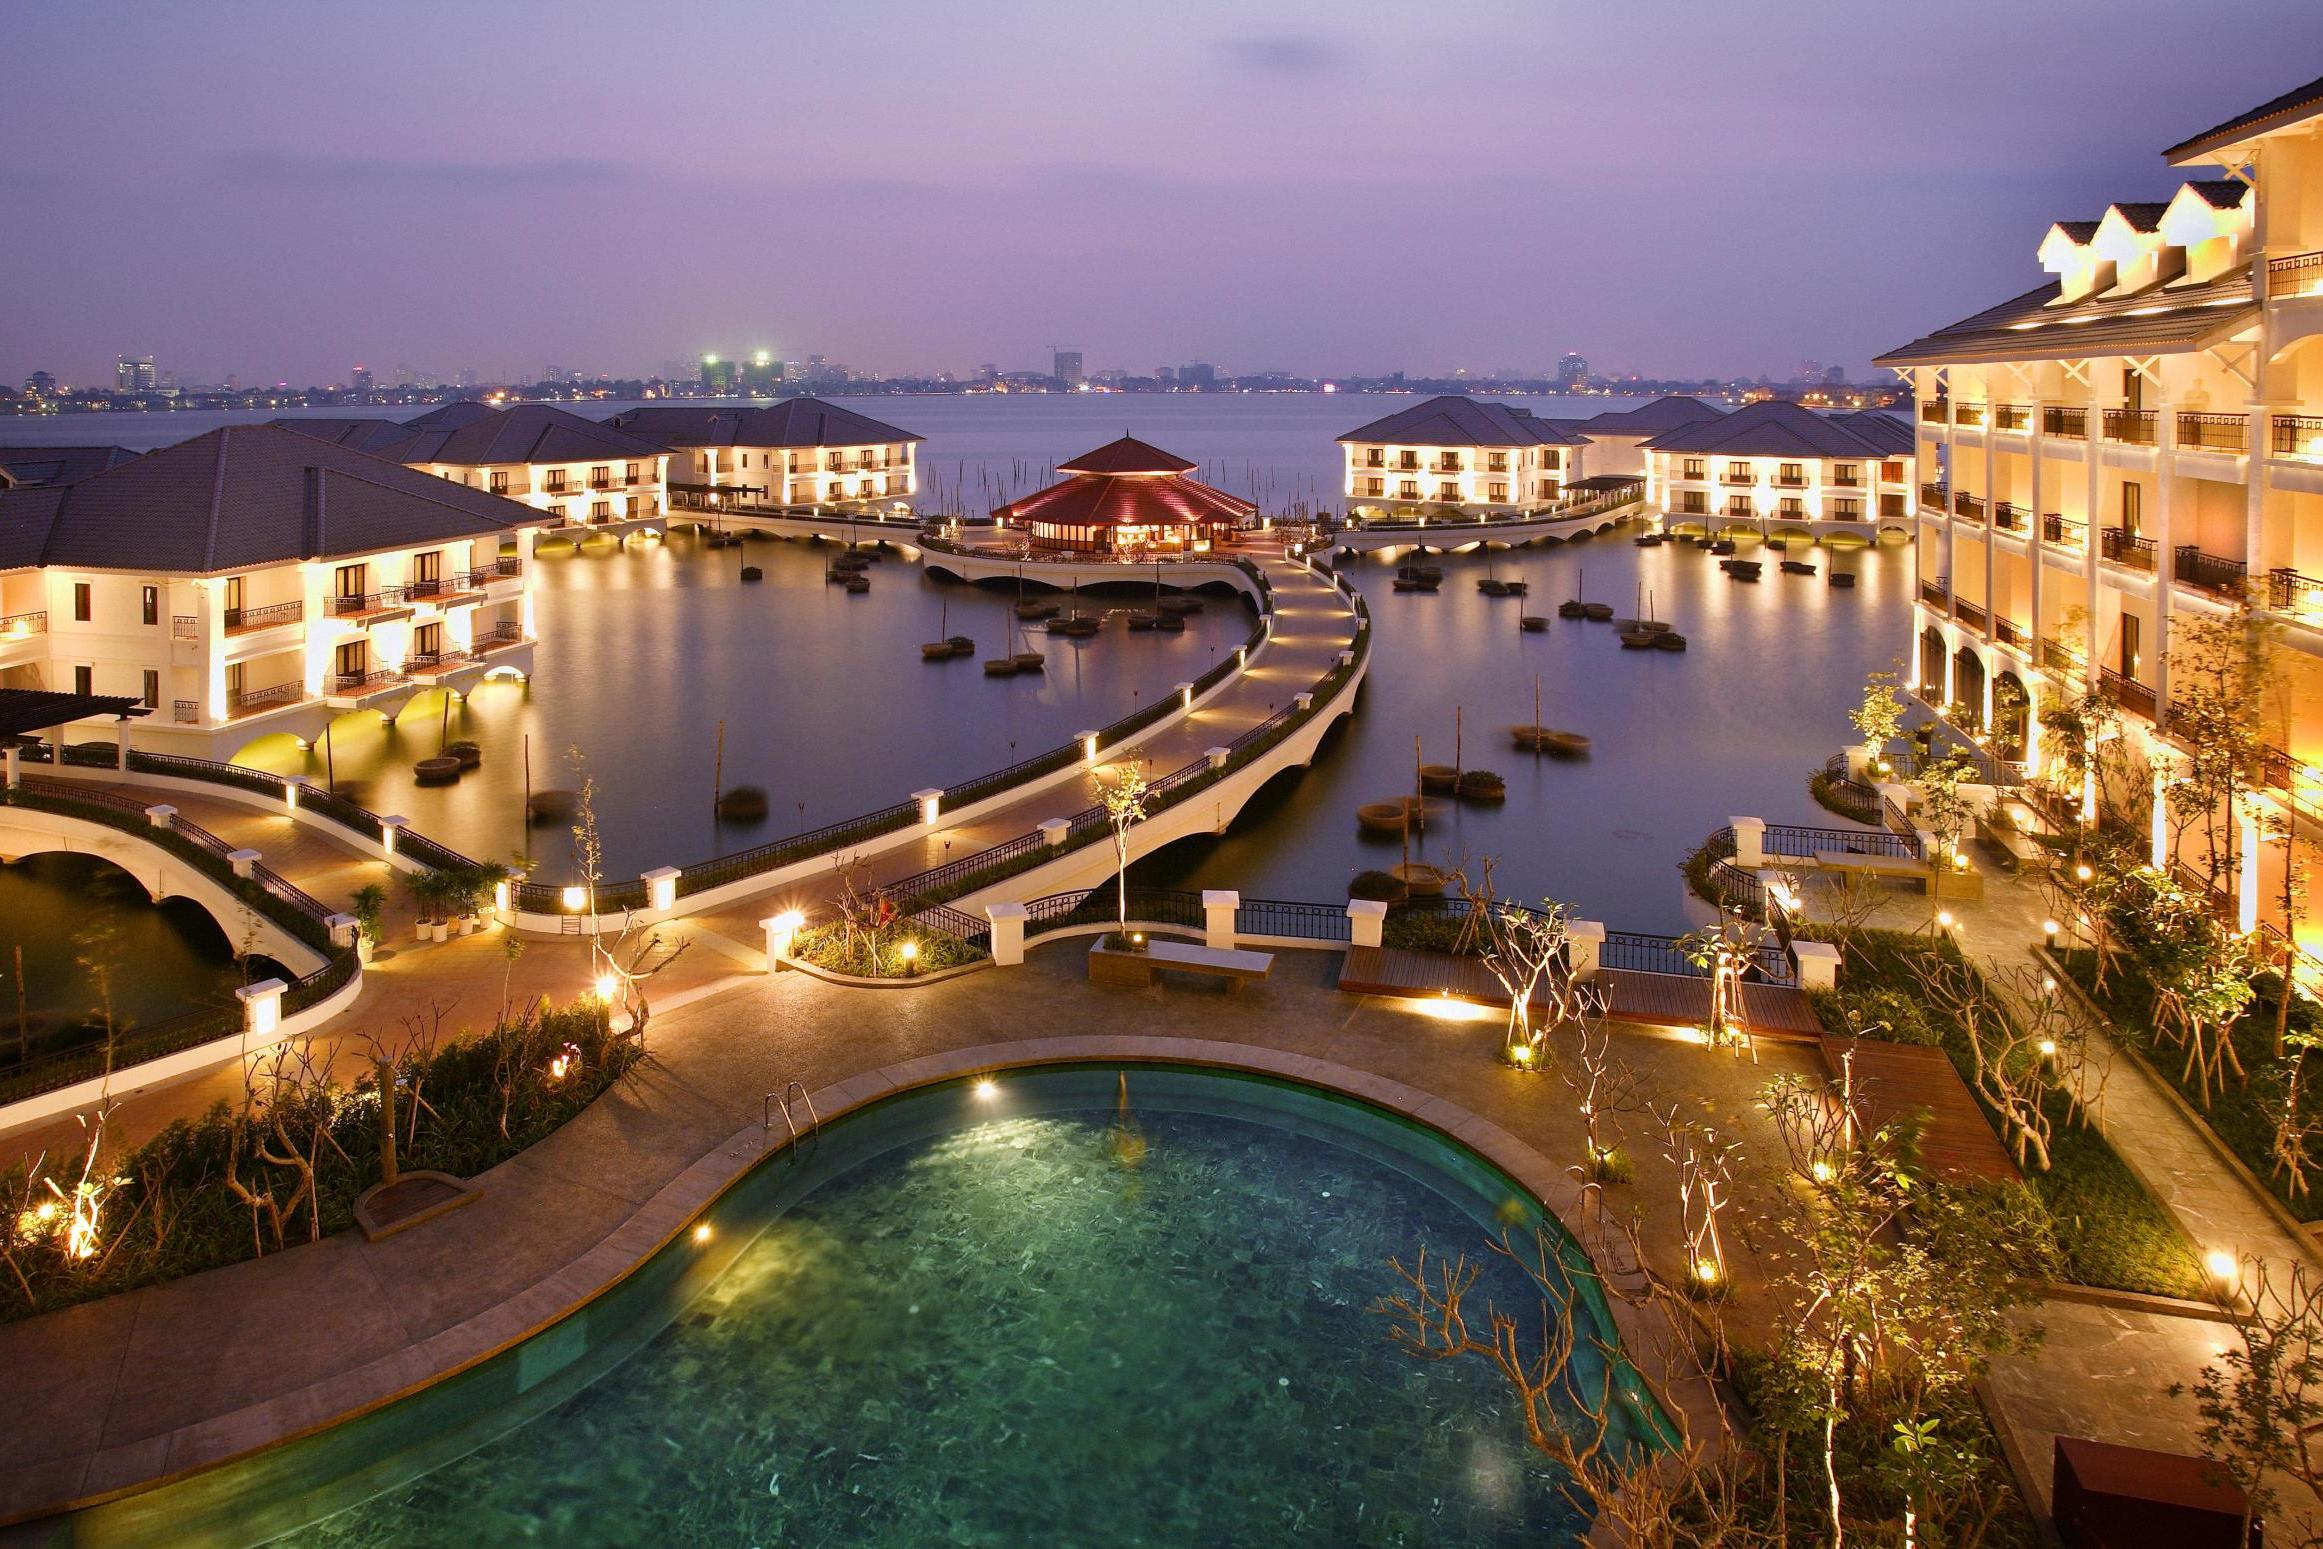 InterContinental West Lake Hanoi offers exceptional lake views